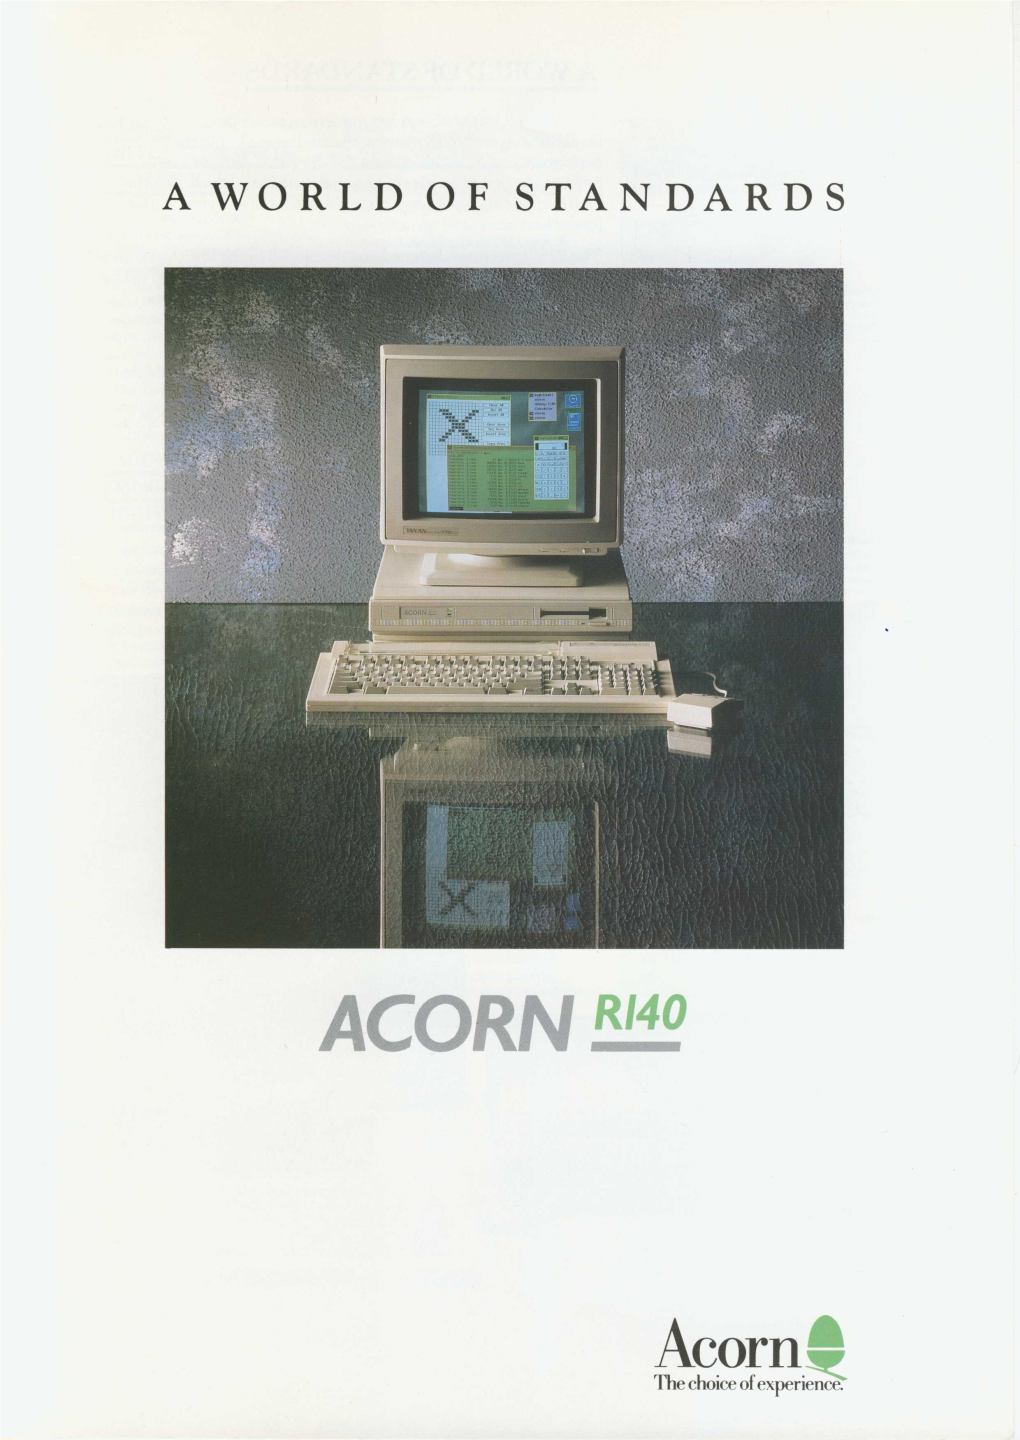 Acorn R140 a World of Standards